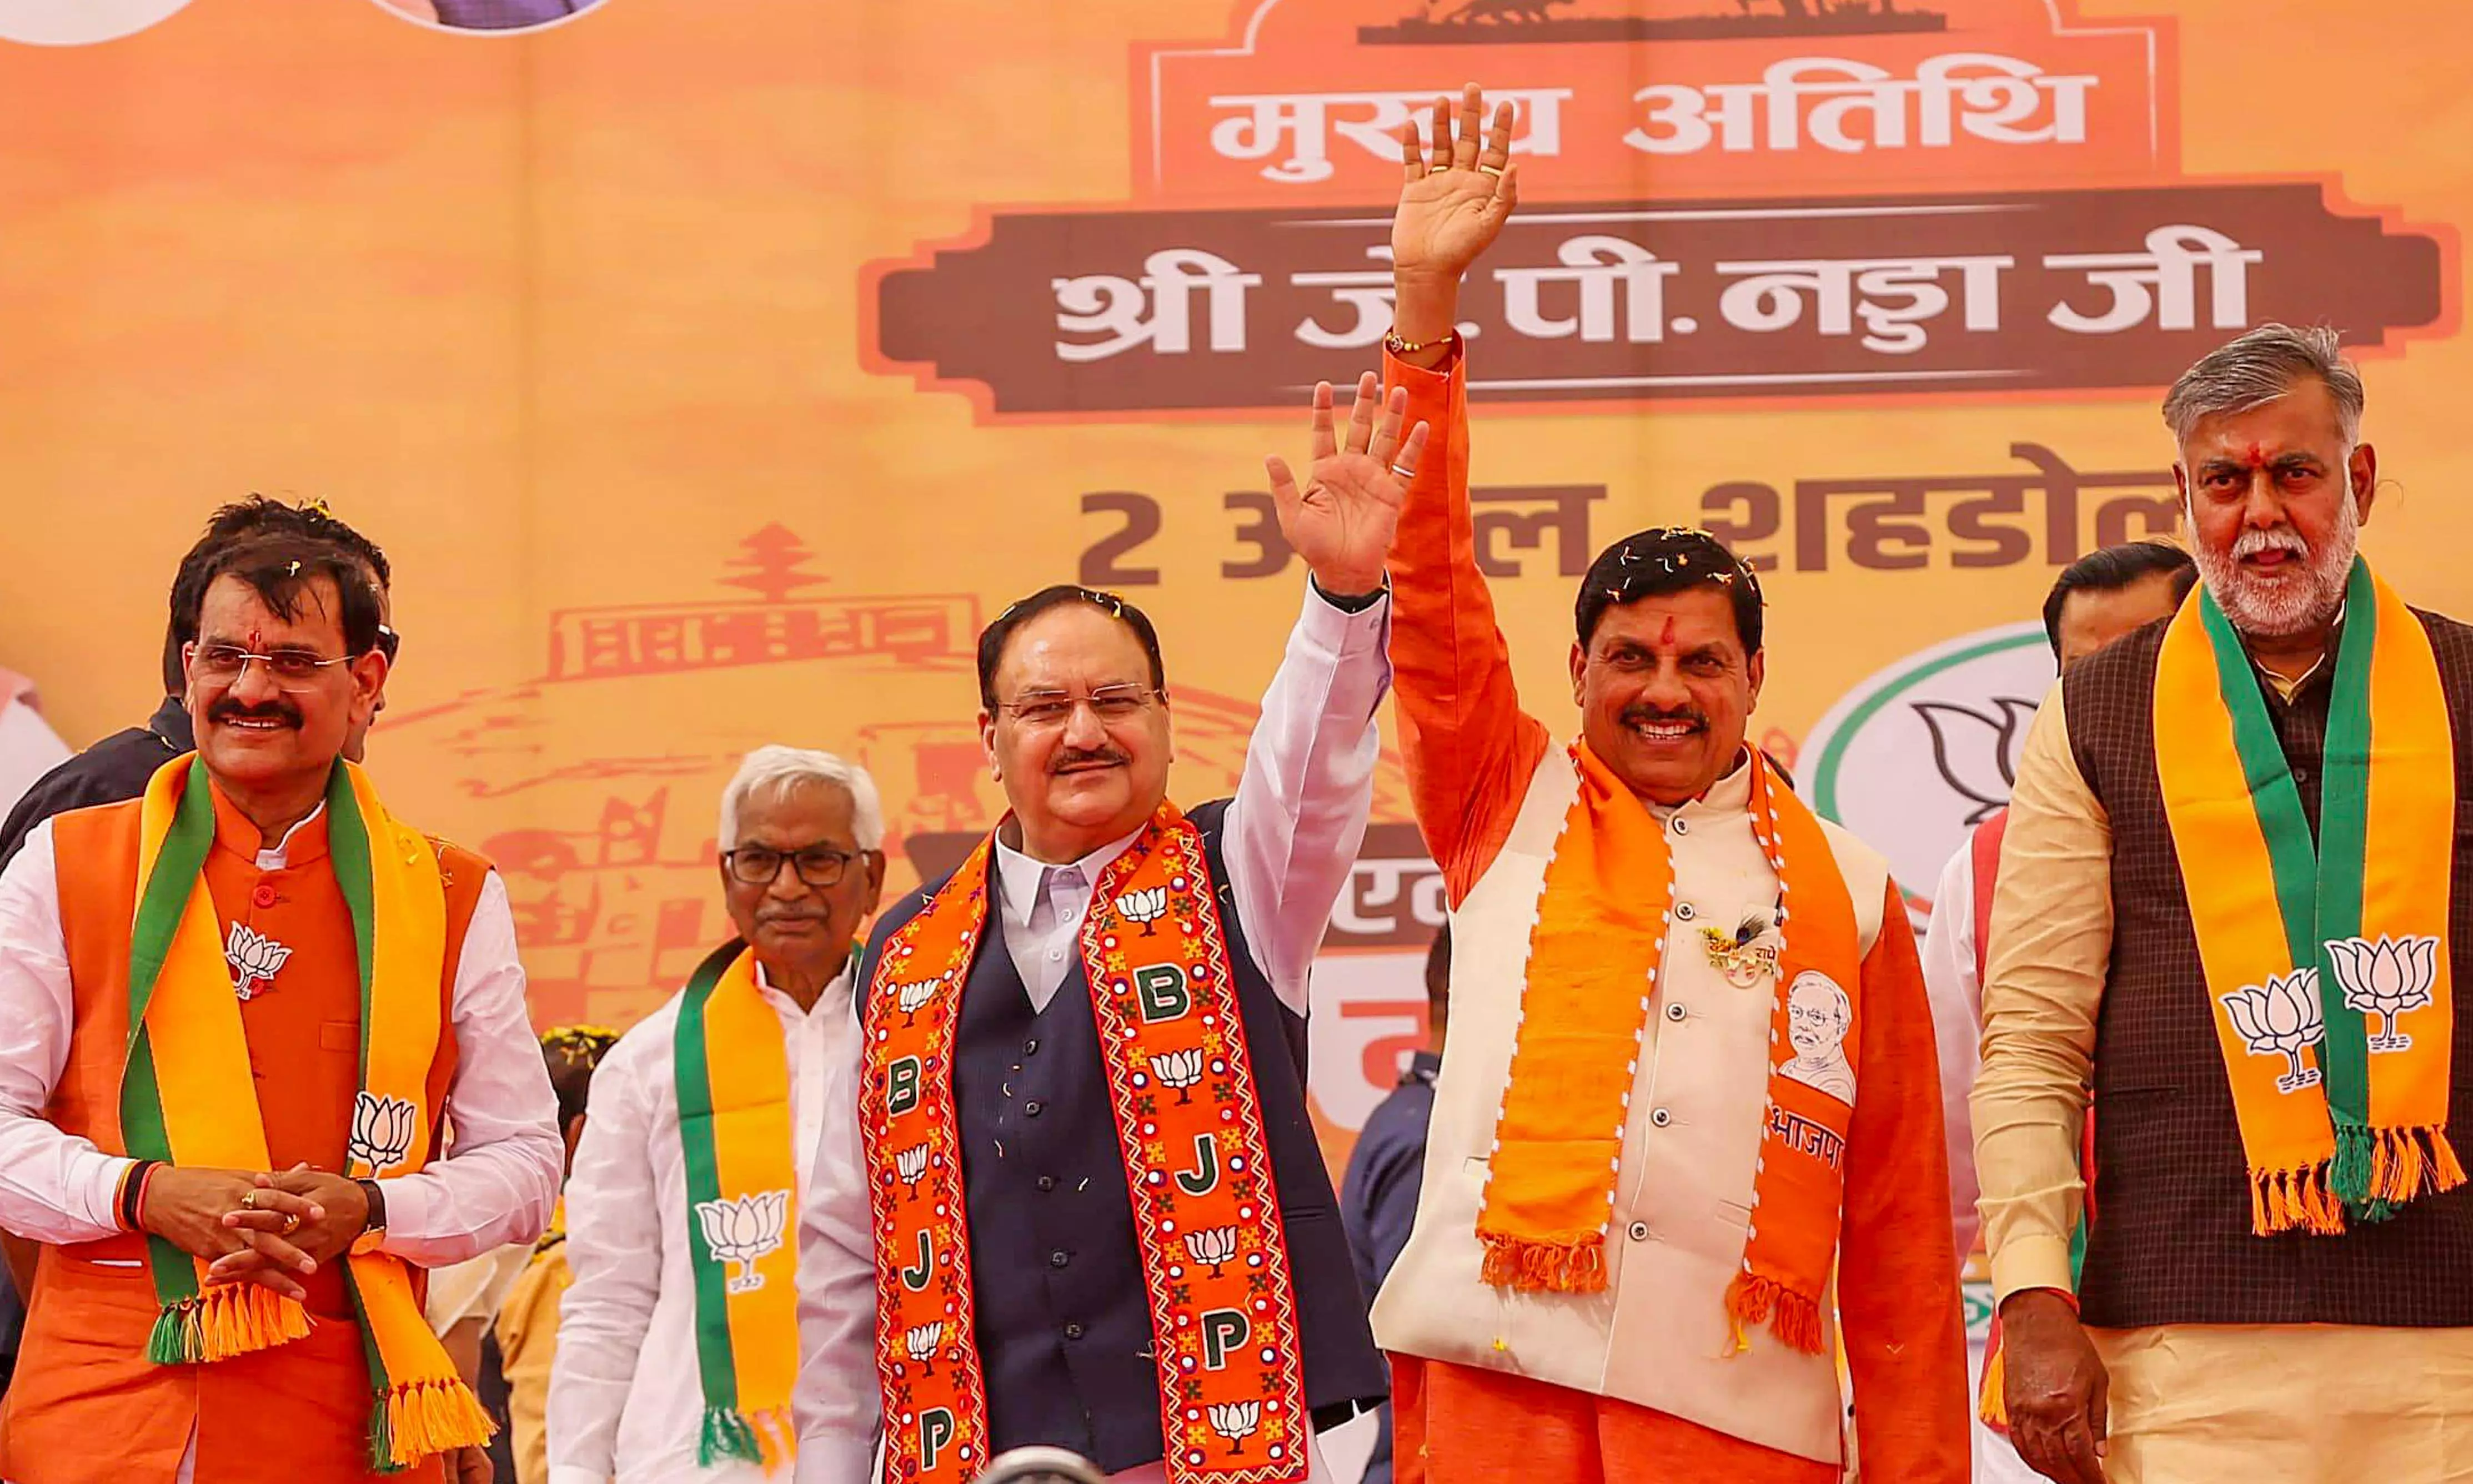 INDI alliance including DMK and Congress trying to save corruption, families: JP Nadda